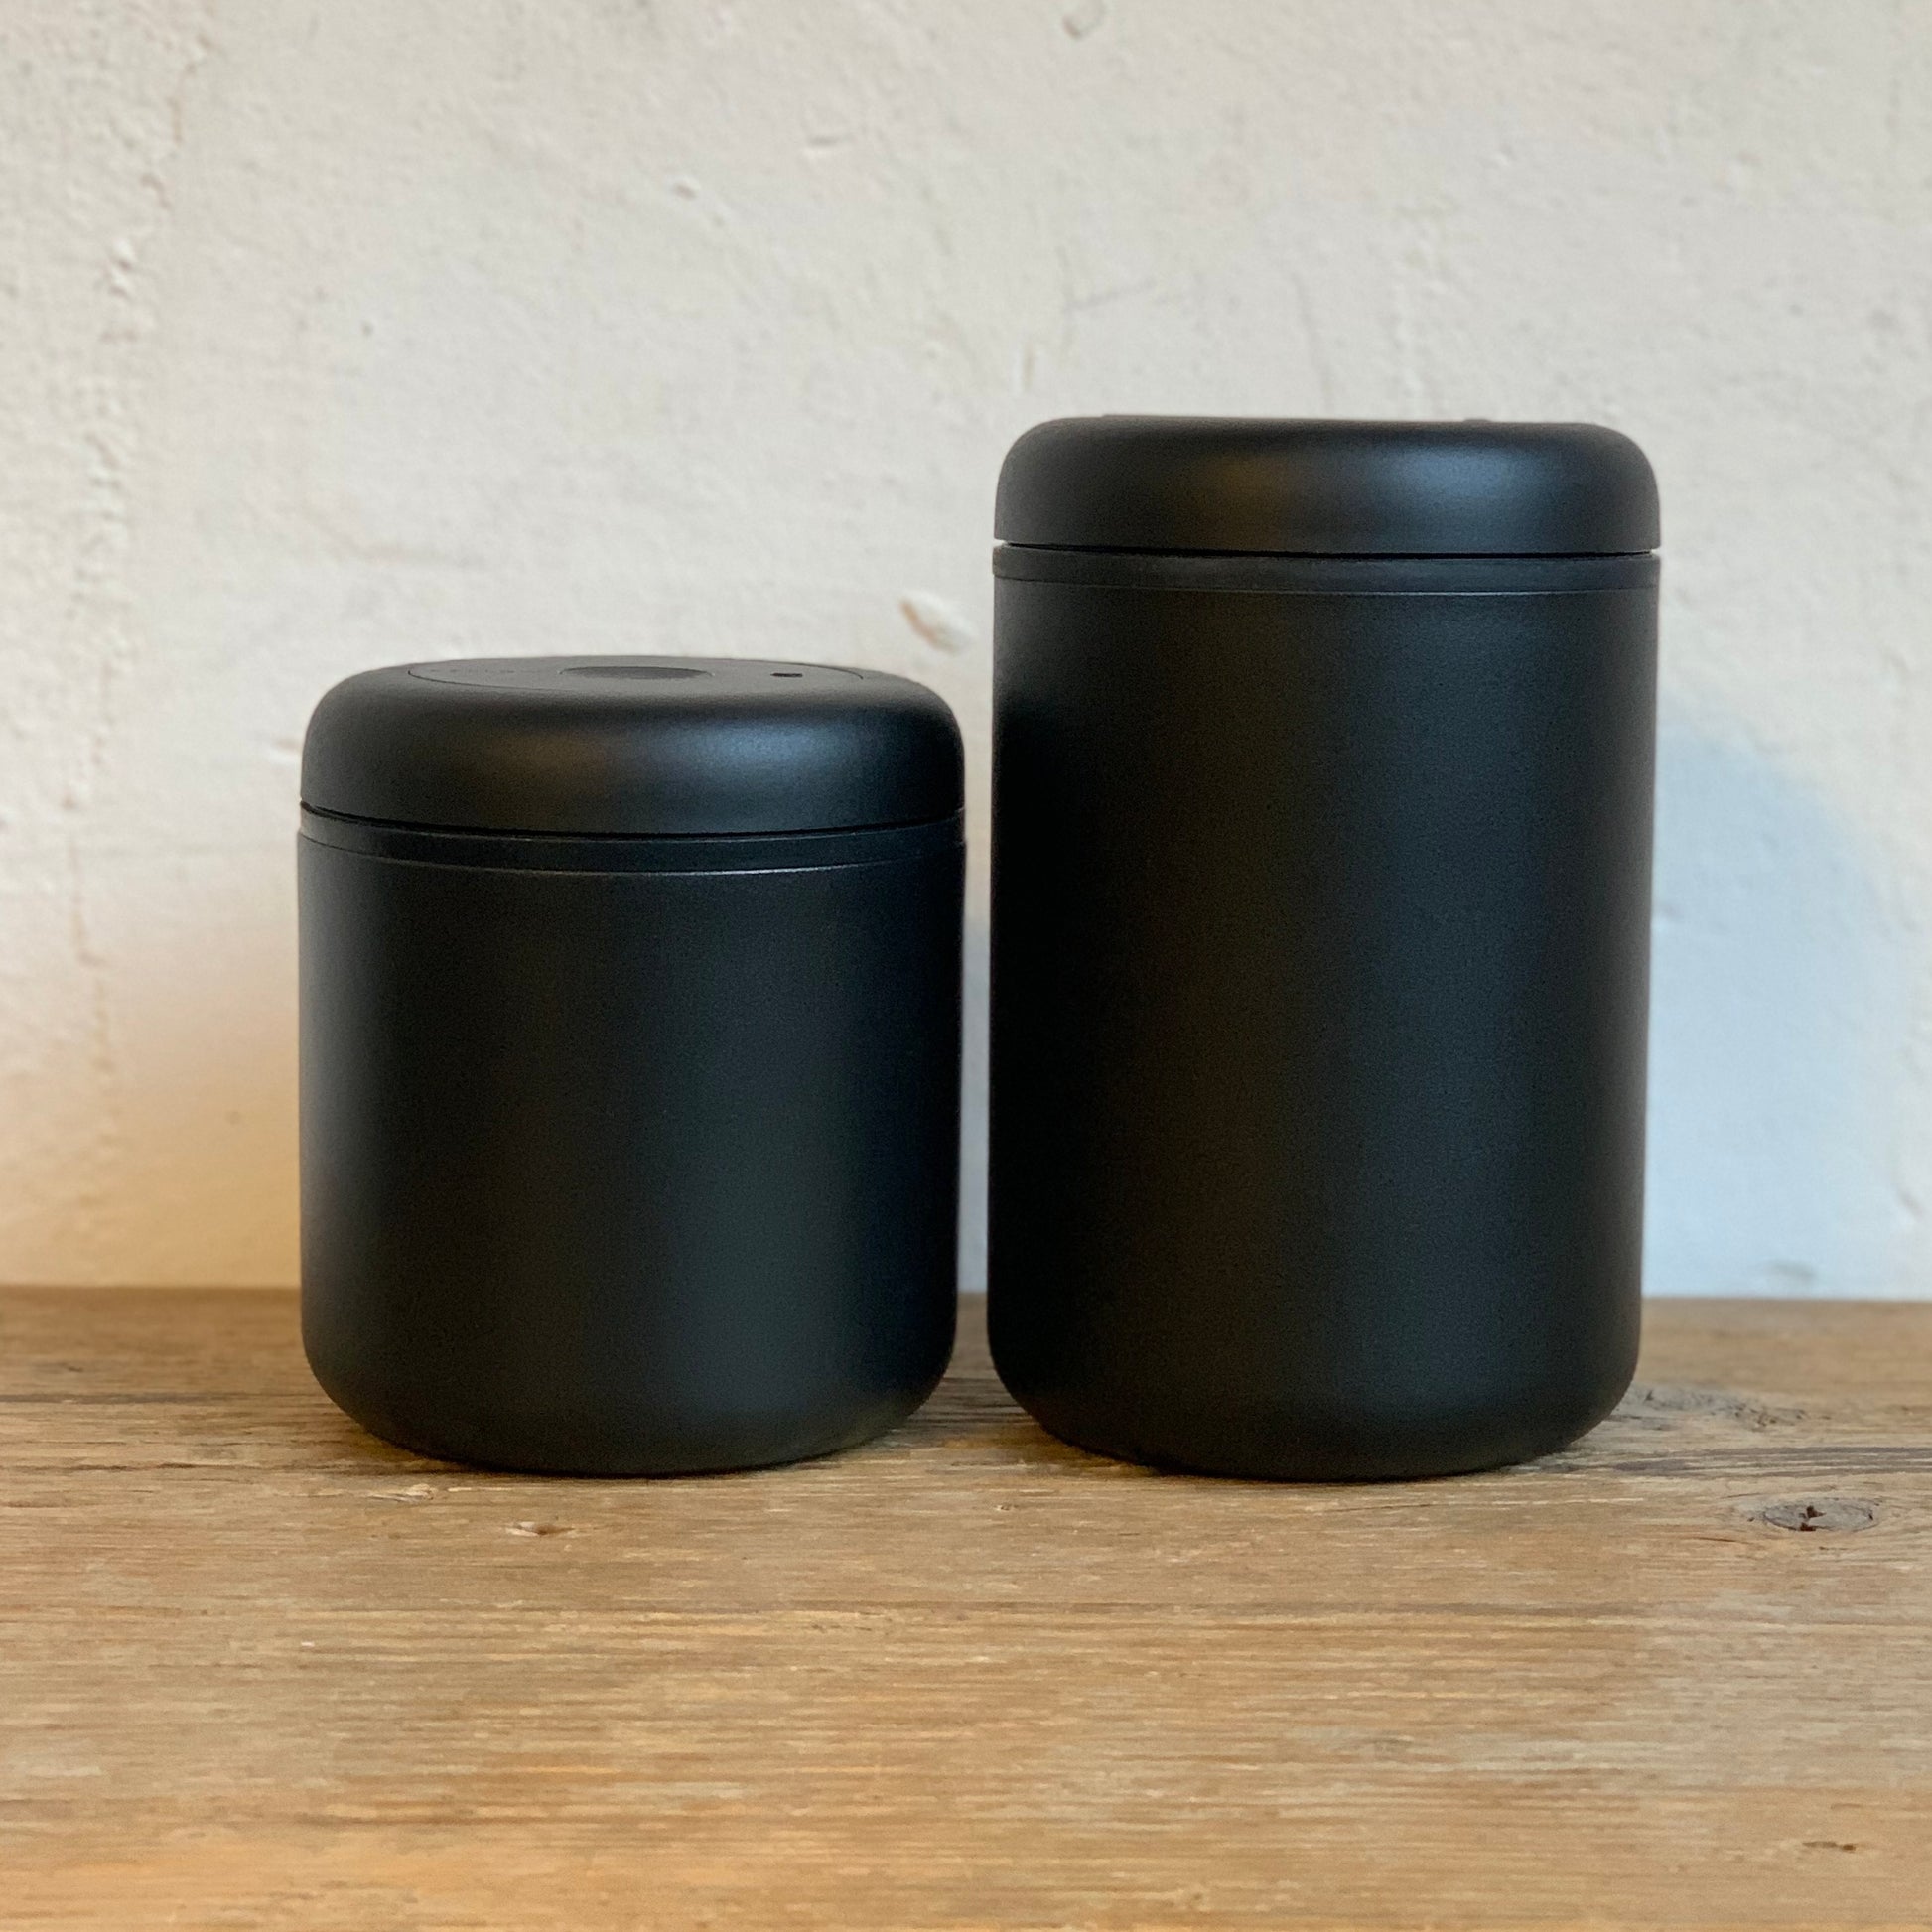 BLACK ATMOS VACUUM COFFEE CANISTER (4844694634576)